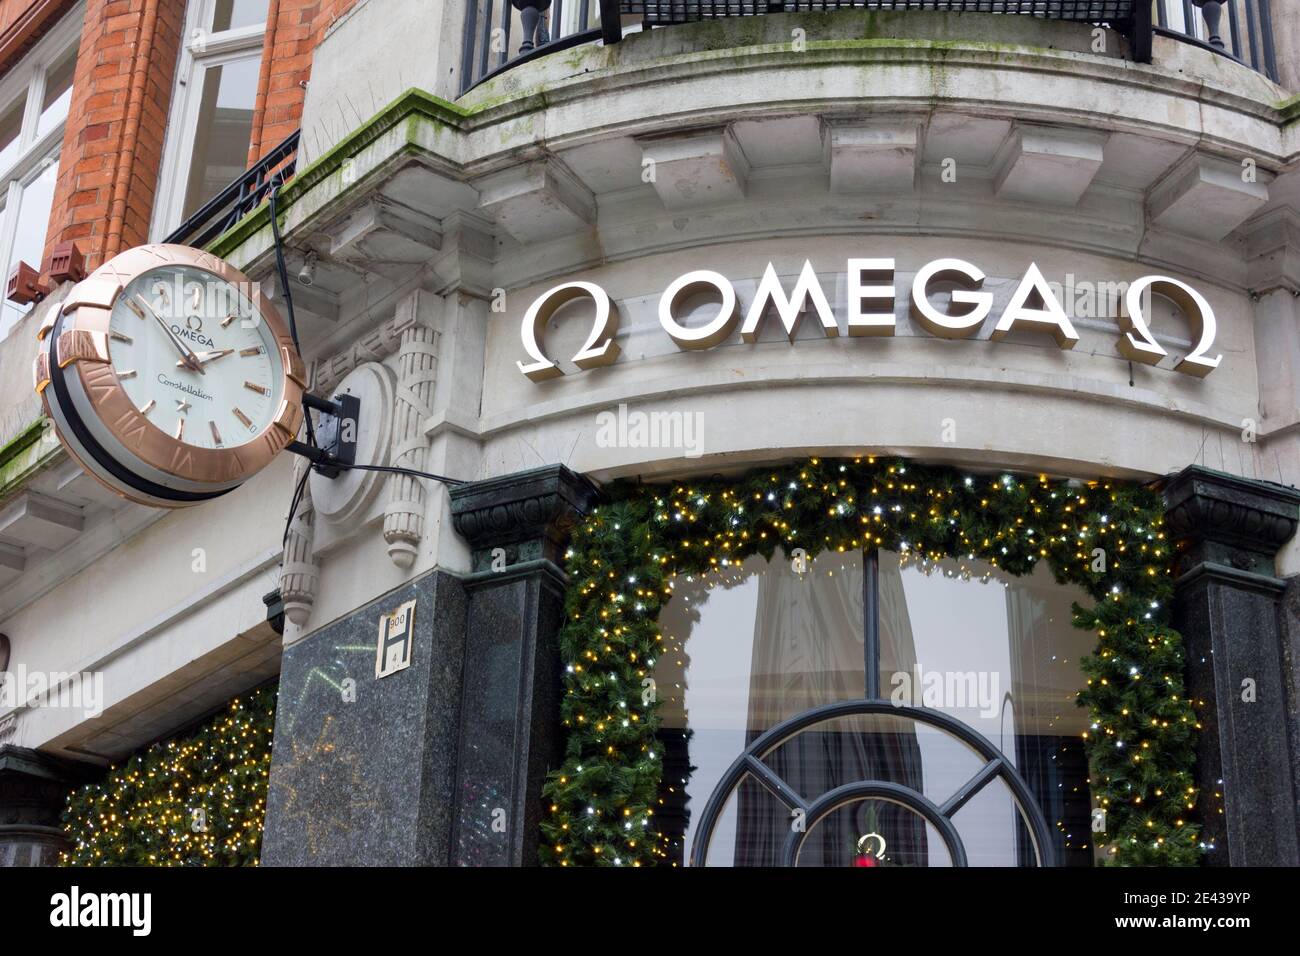 omega Watch Store, Oxford Street, Londres Banque D'Images